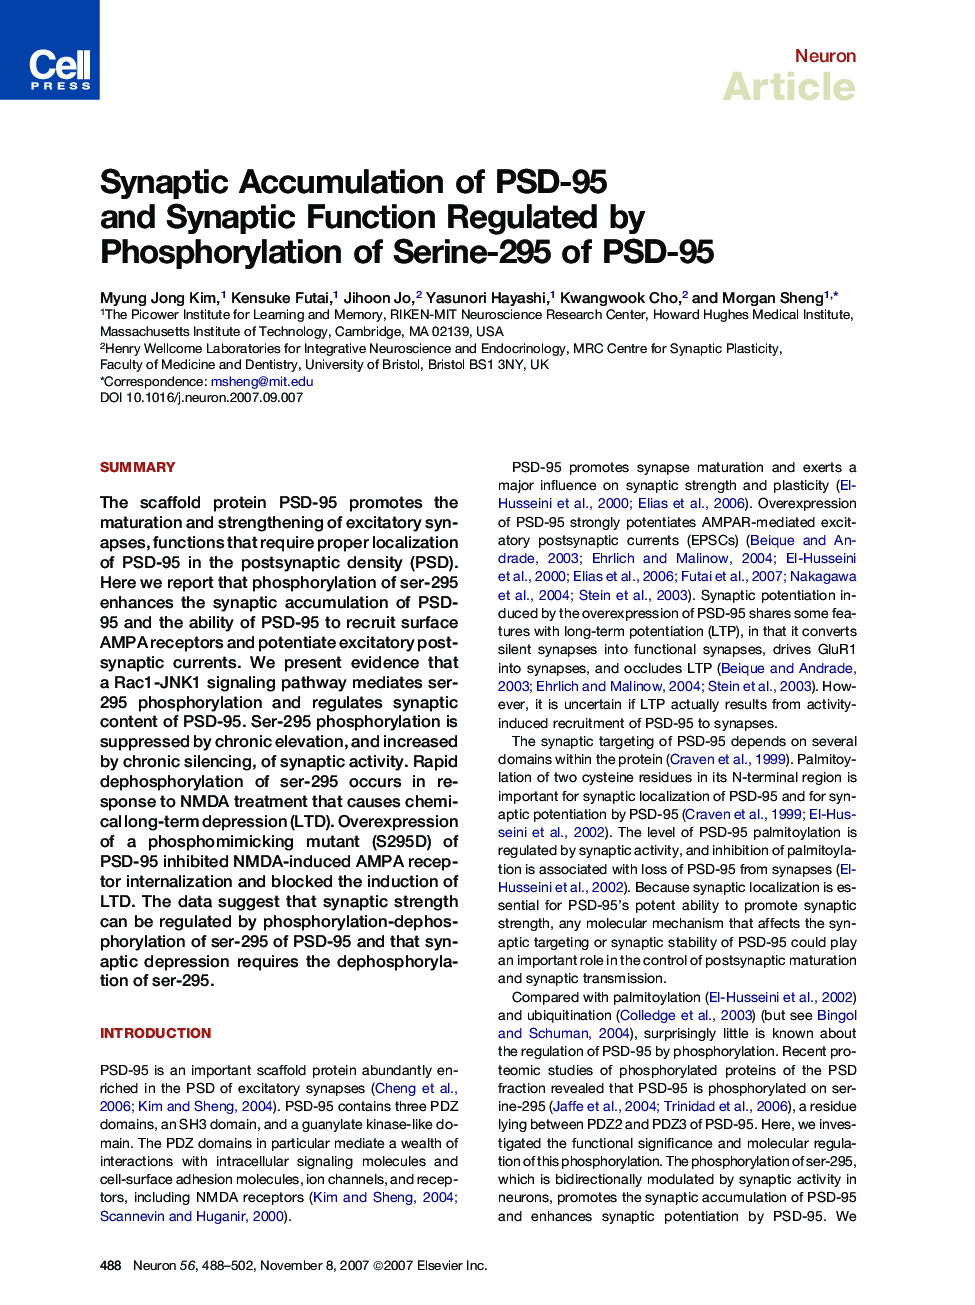 Synaptic Accumulation of PSD-95 and Synaptic Function Regulated by Phosphorylation of Serine-295 of PSD-95